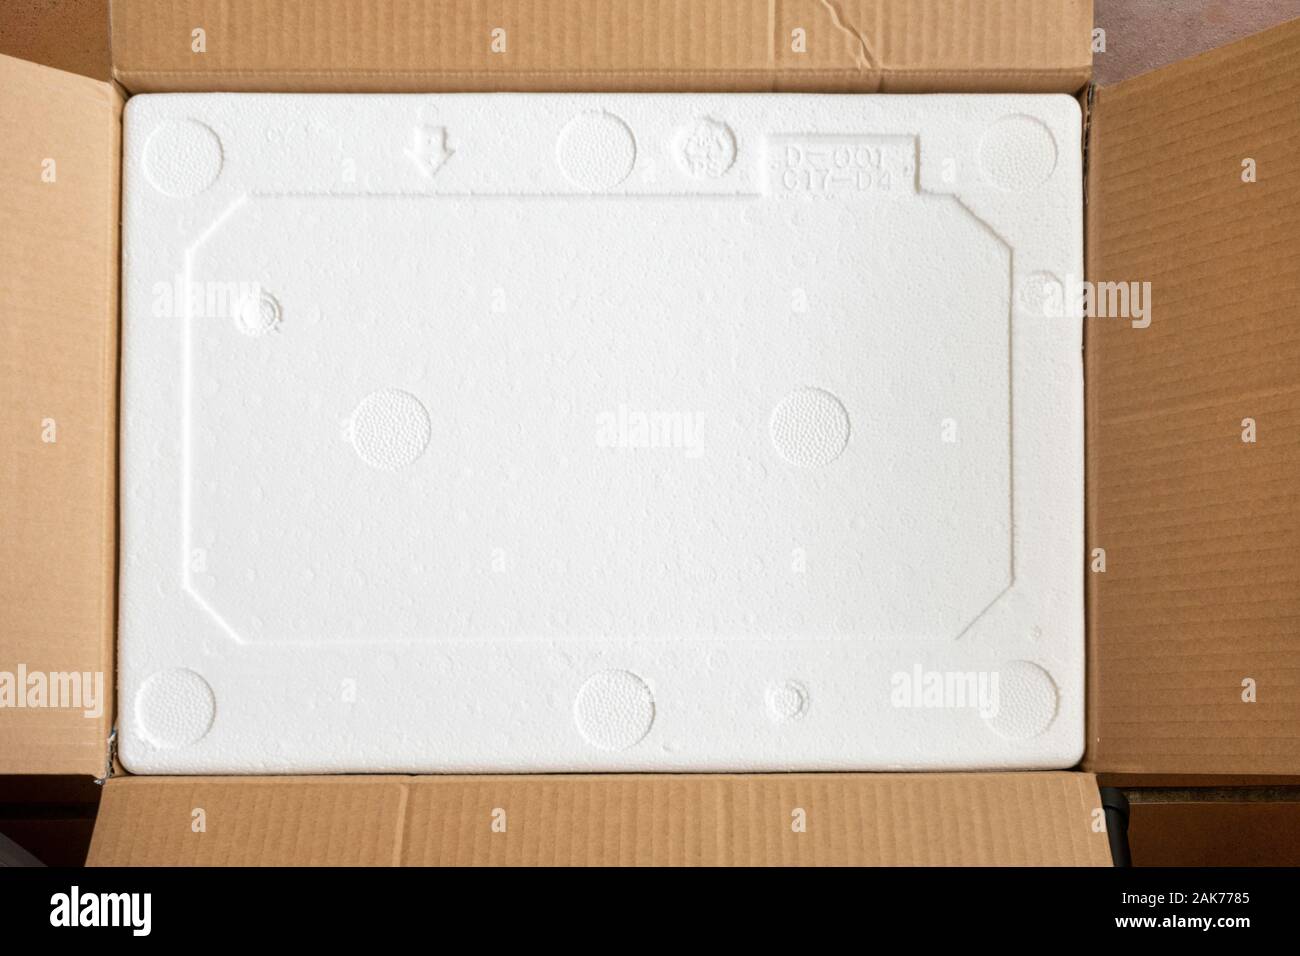 Packaging - cardboard box and polystyrene Stock Photo